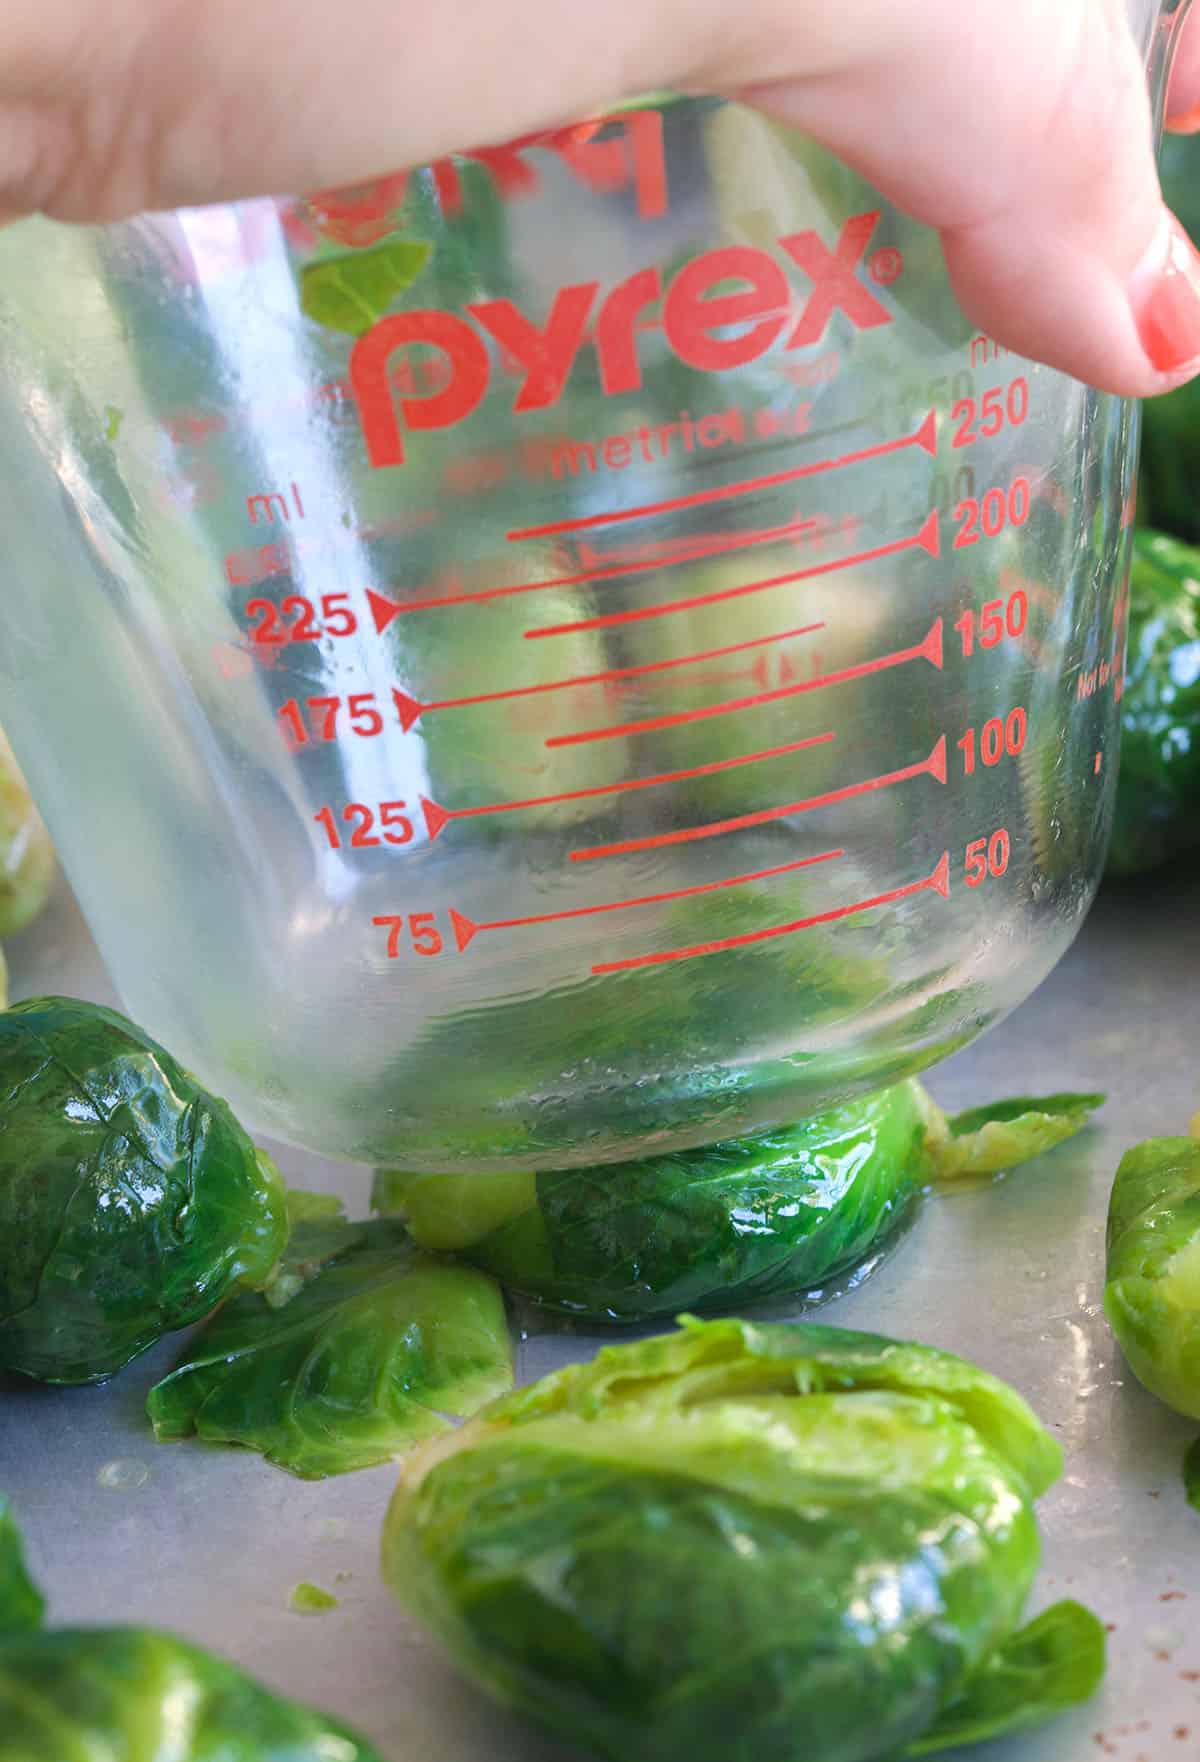 A brussels sprout is being smashed by a measuring cup.